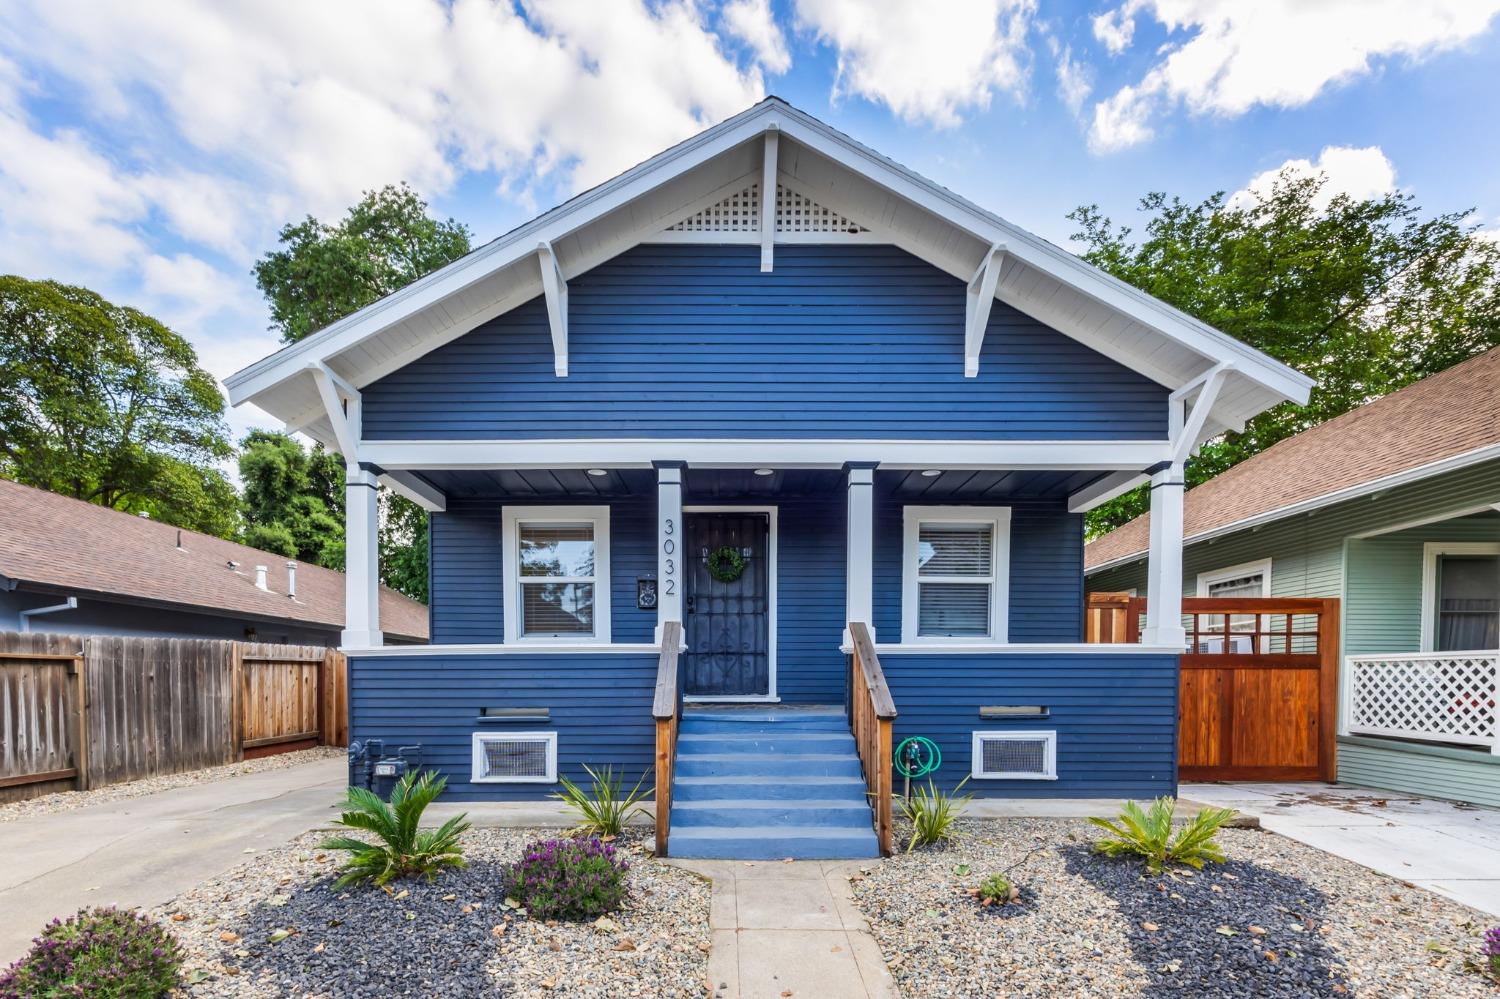 This adorable craftsman bungalow with historical flare, vintage charm and modern amenities is  turnk